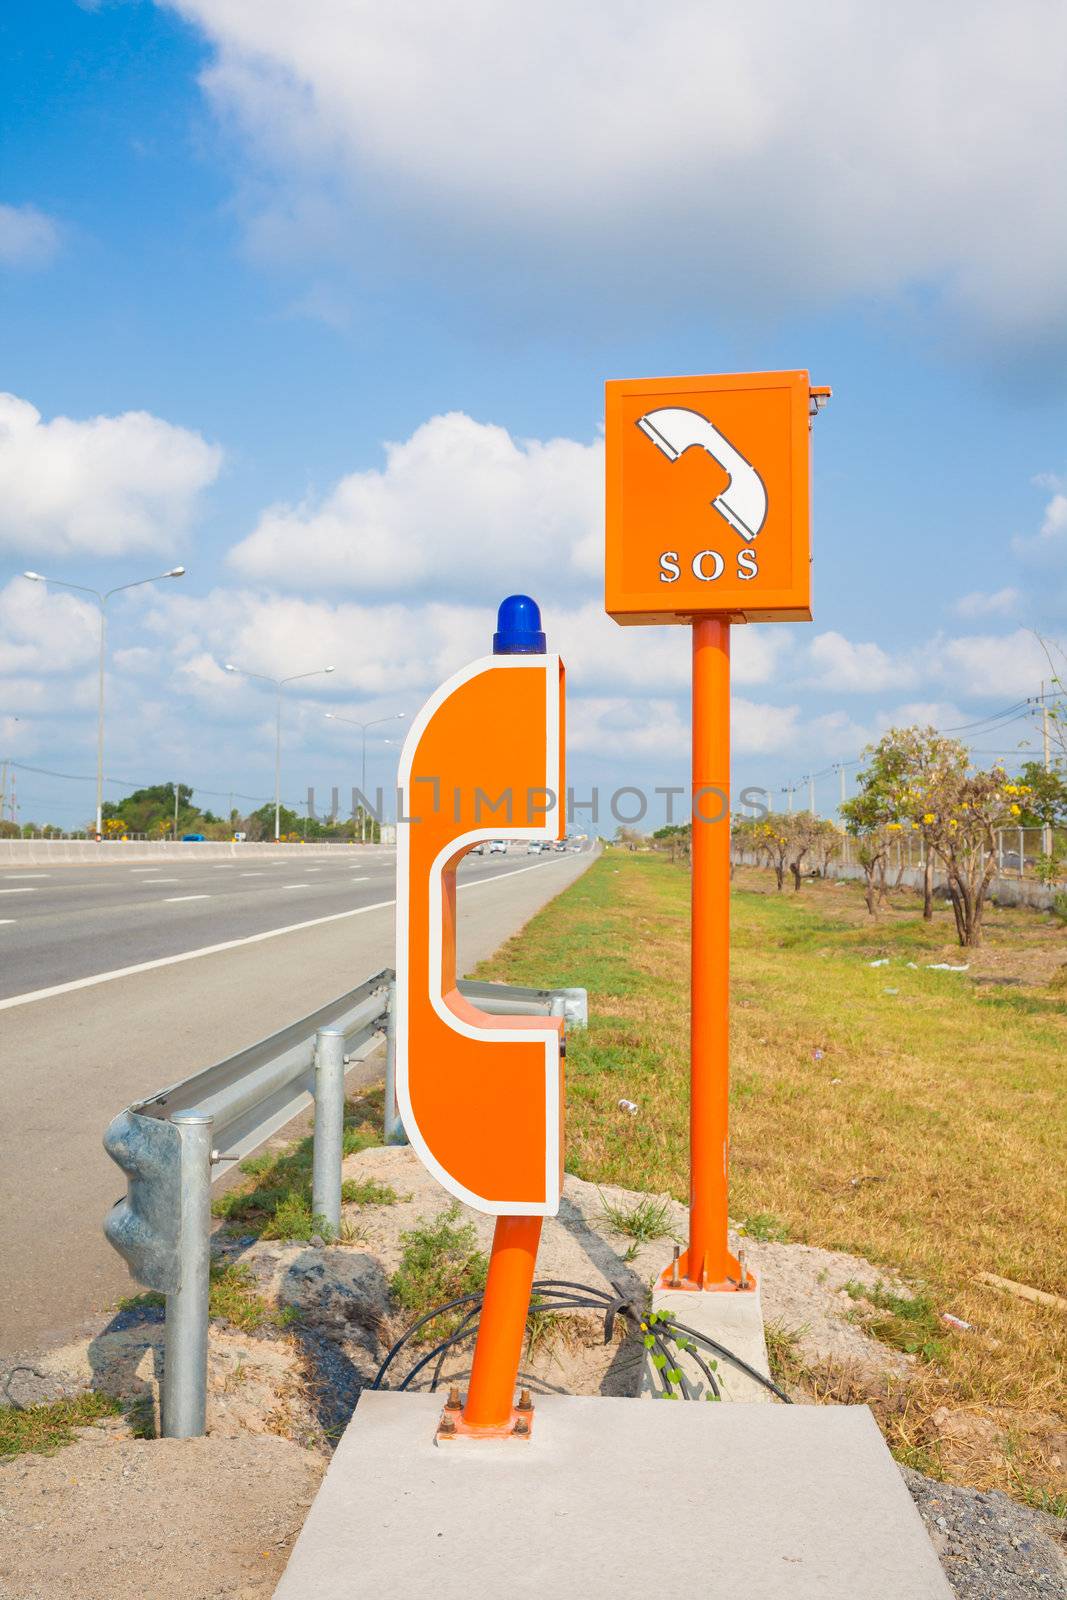 SOS sign and phone box on highway, road safety